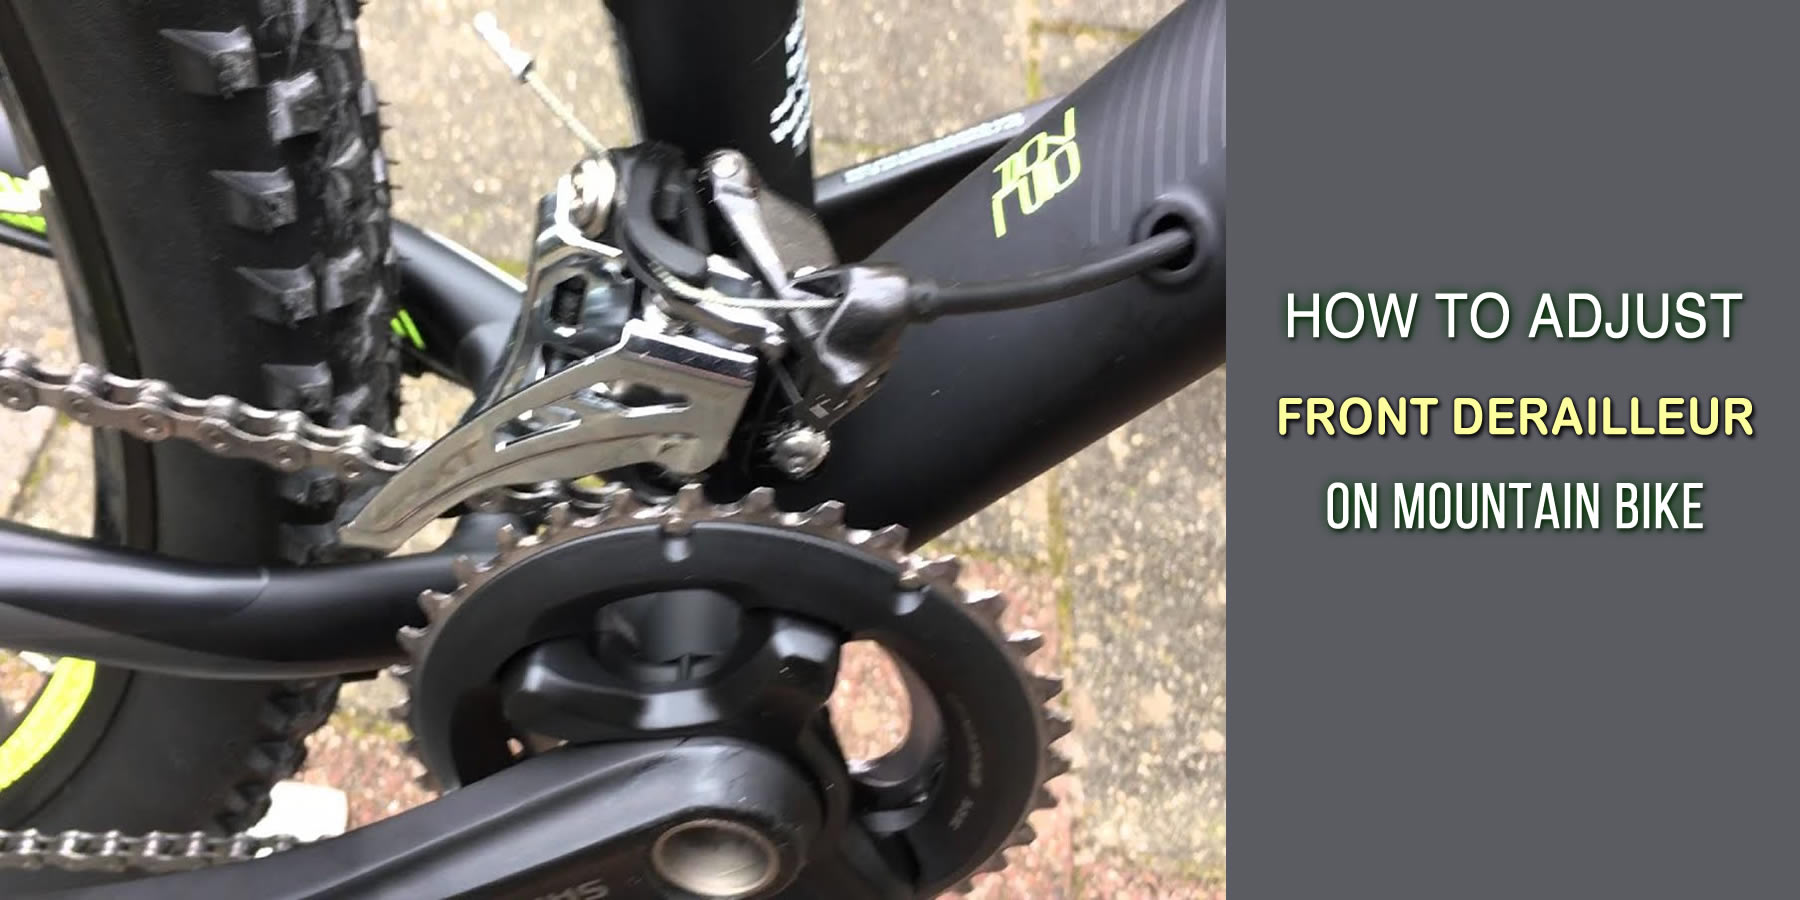 How To Adjust Front Derailleur On Mountain Bike